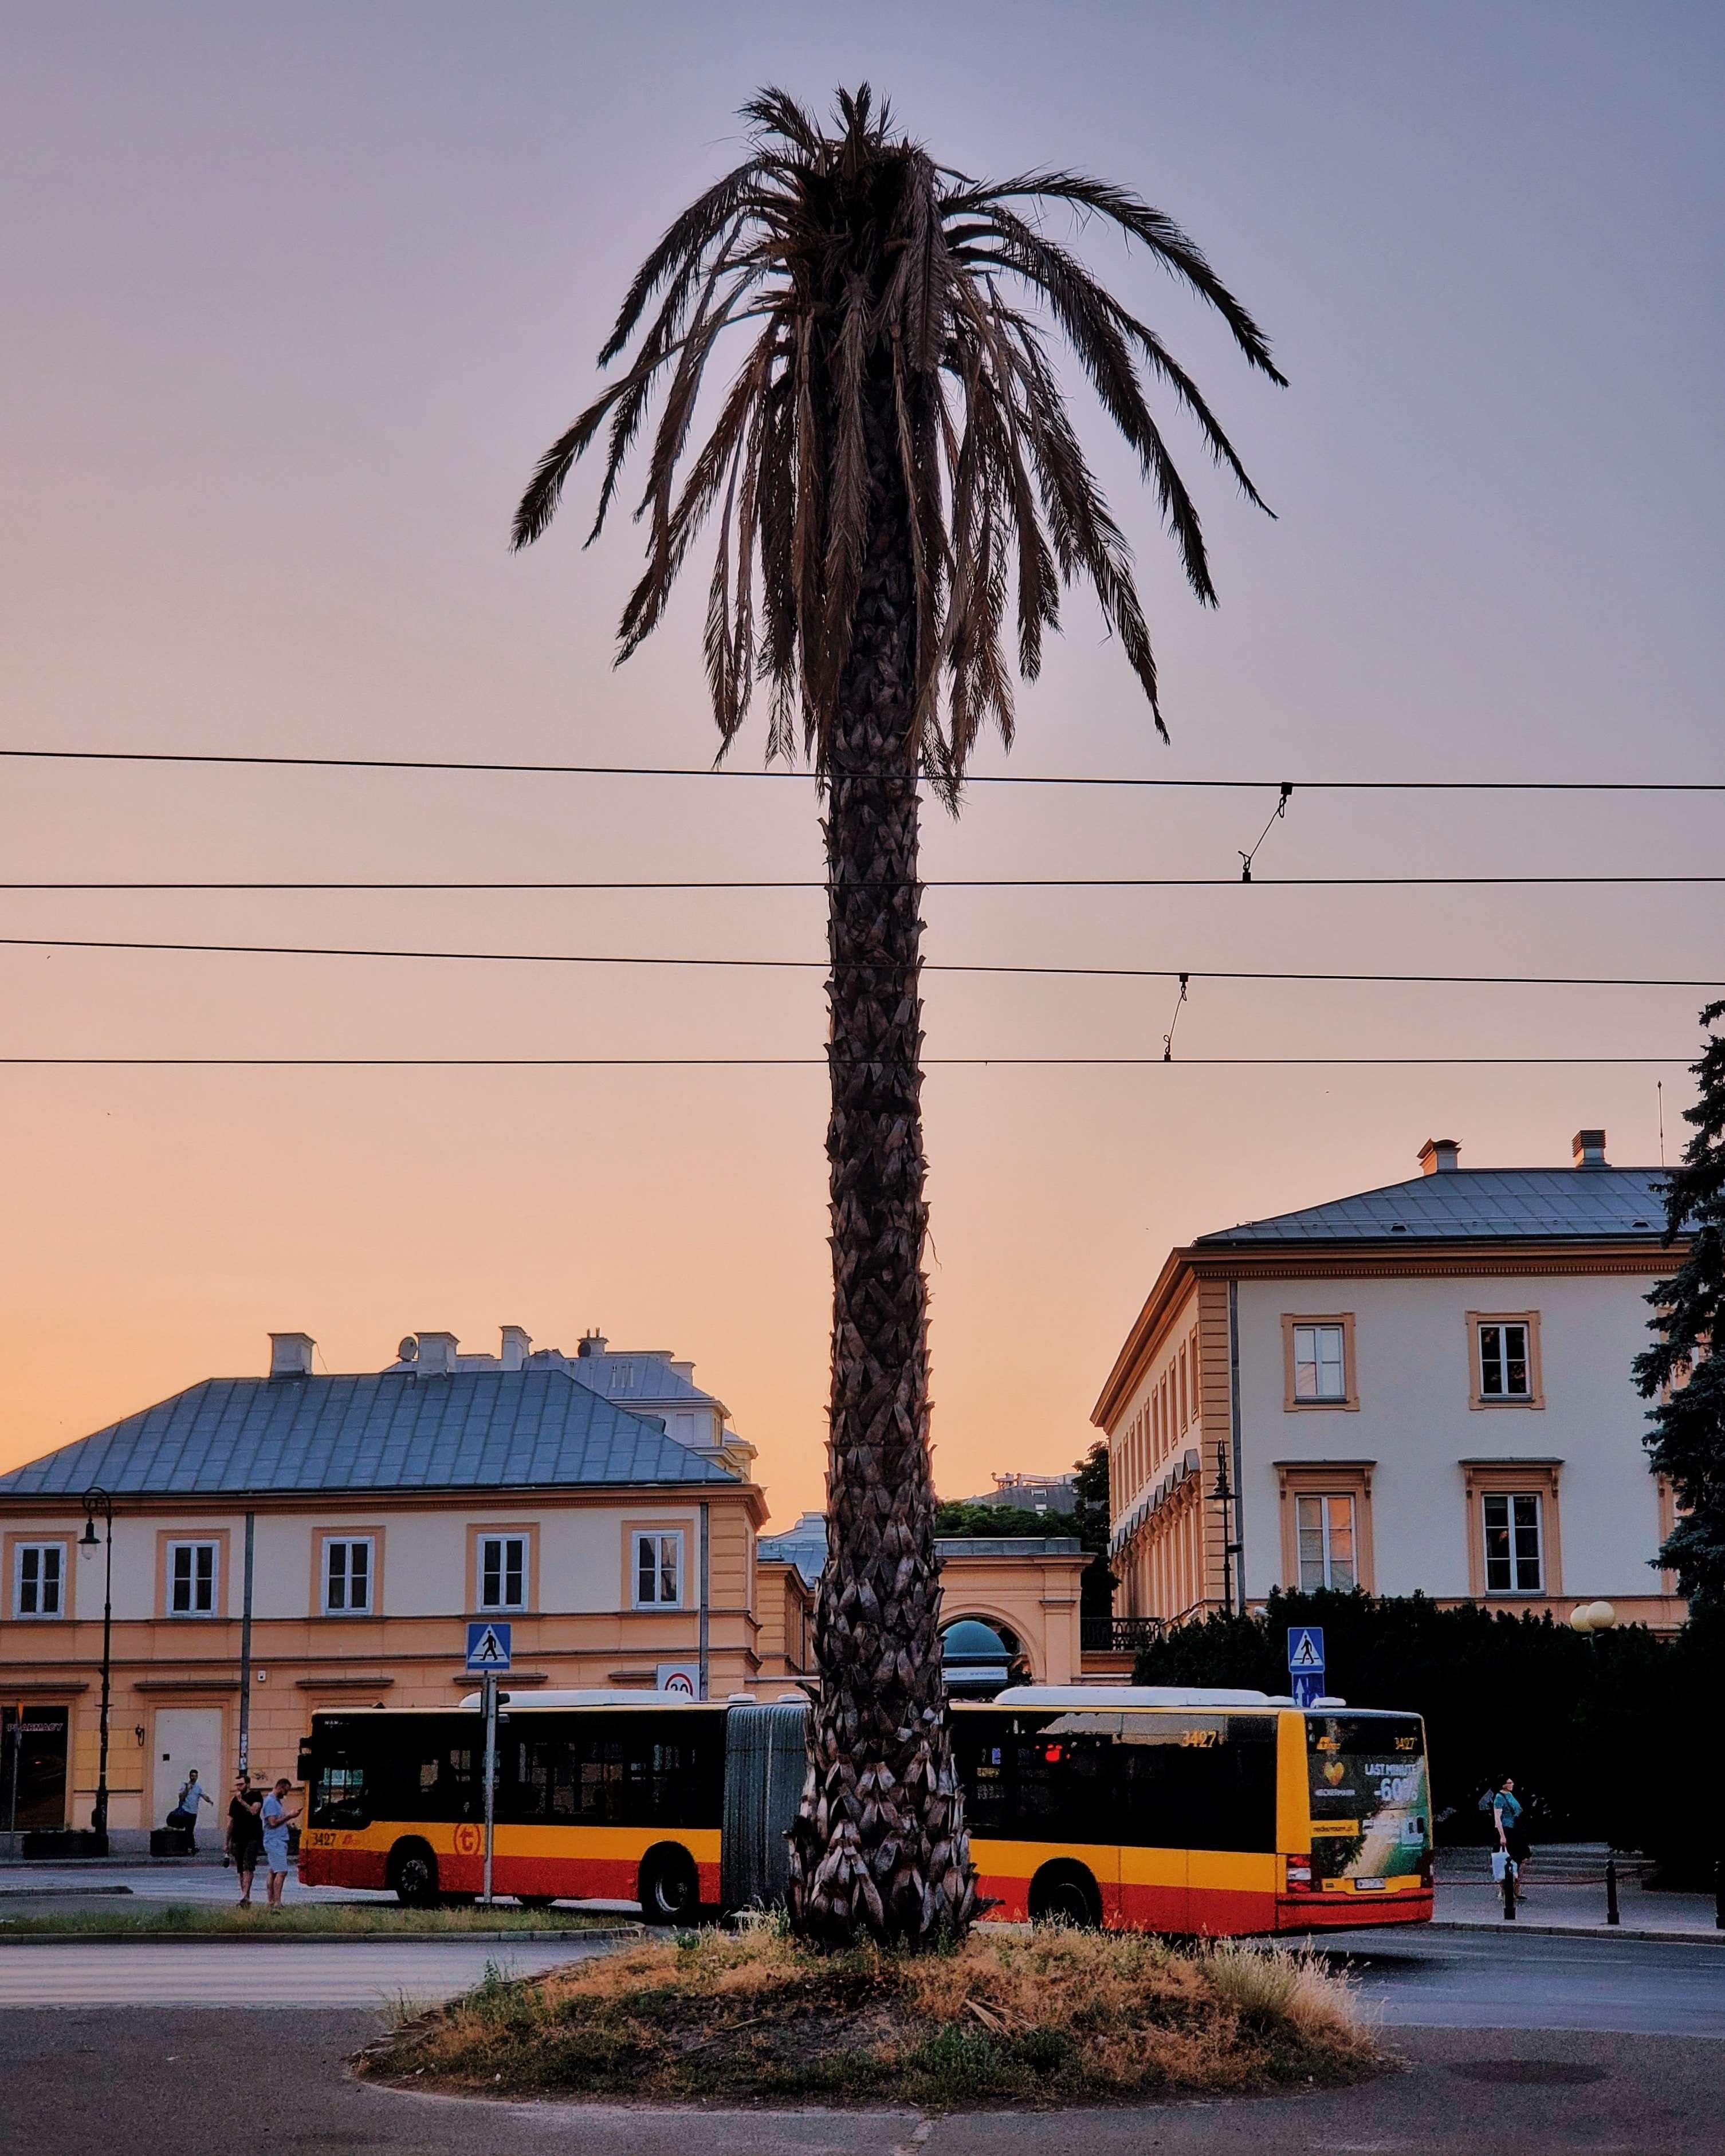 The palm tree of Warsaw in the middle of a roundabout